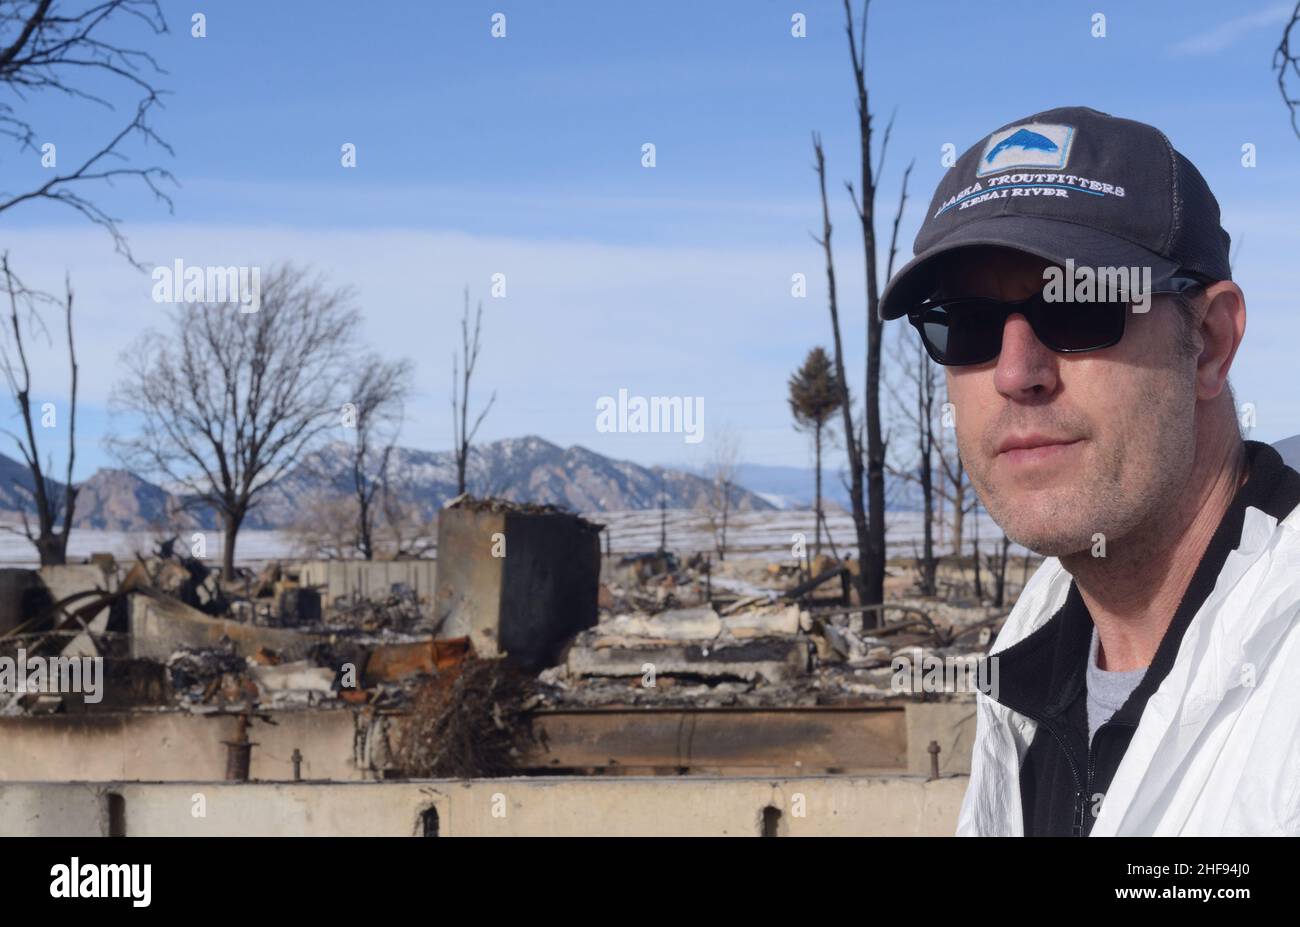 Brent Peckham at the site of his burned home in Superior CO. Peckham's home was destroyed in the Marshall Fire, Dec. 20, 2021. Stock Photo